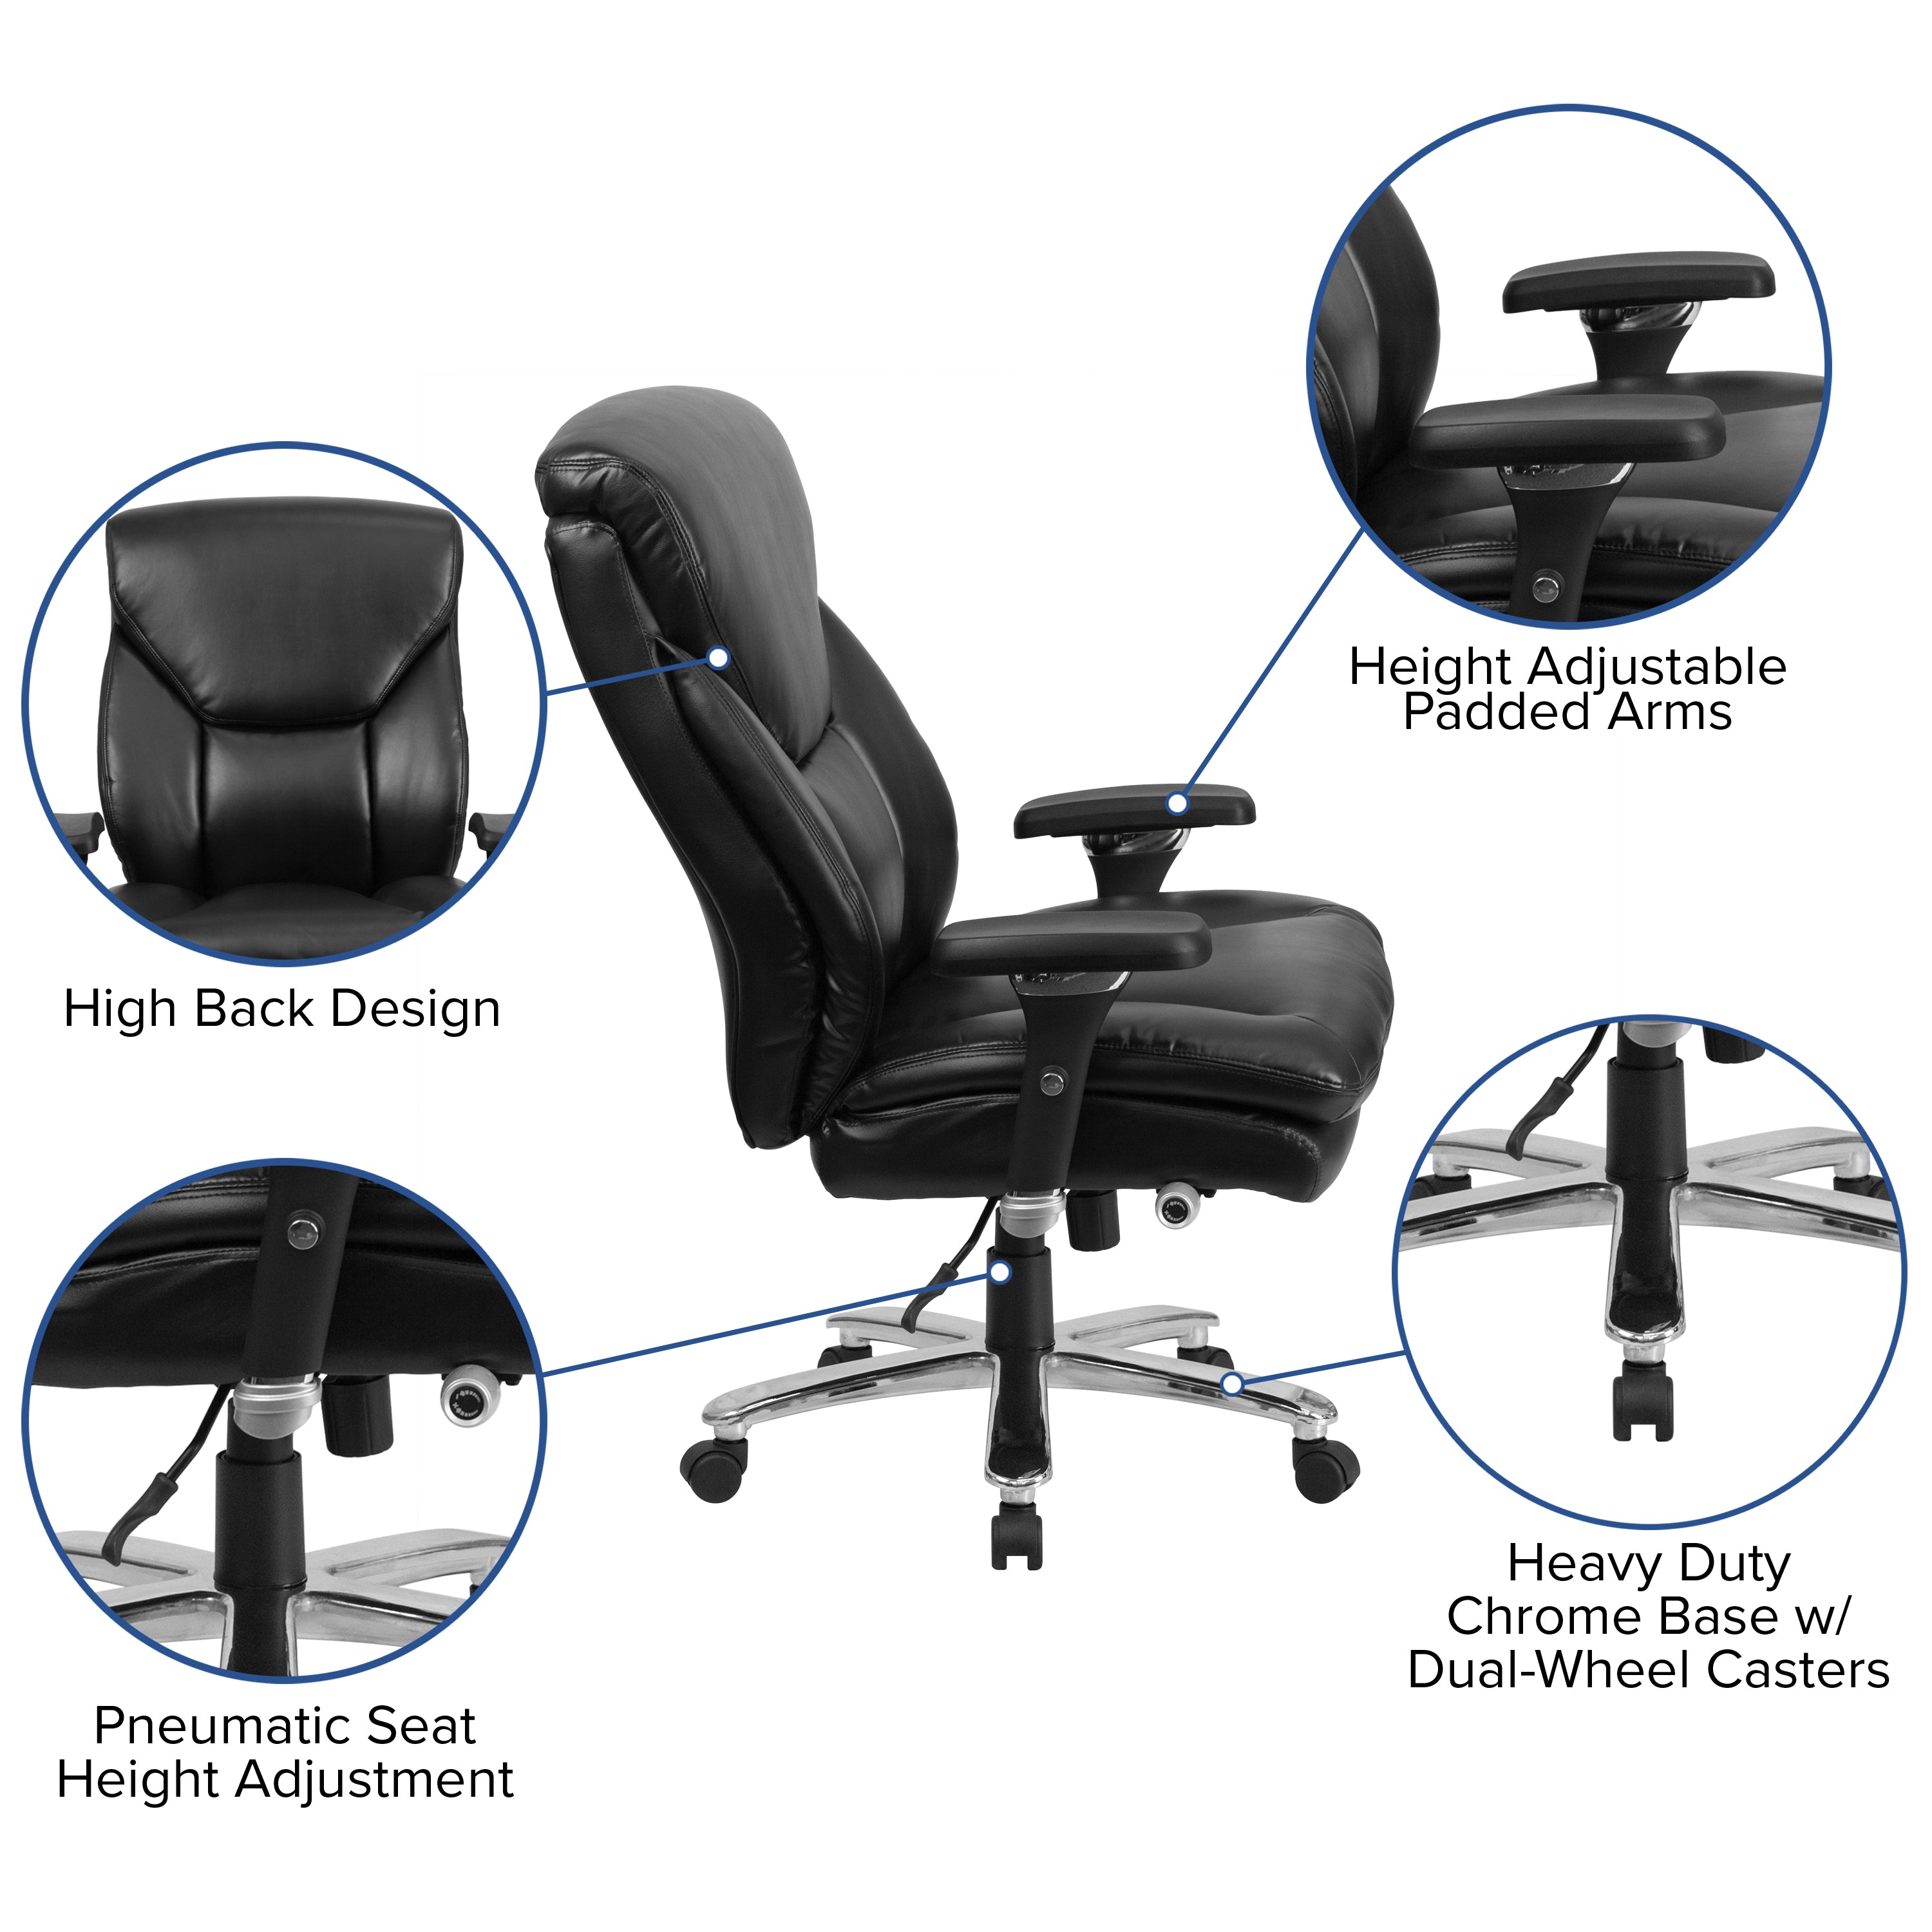 HERCULES Series 24/7 Intensive Use Big & Tall 400 lb. Rated High Back Executive Swivel Ergonomic Office Chair with Lumbar Knob and Large Triangular Shaped Headrest-Big & Tall Office Chair-Flash Furniture-Wall2Wall Furnishings